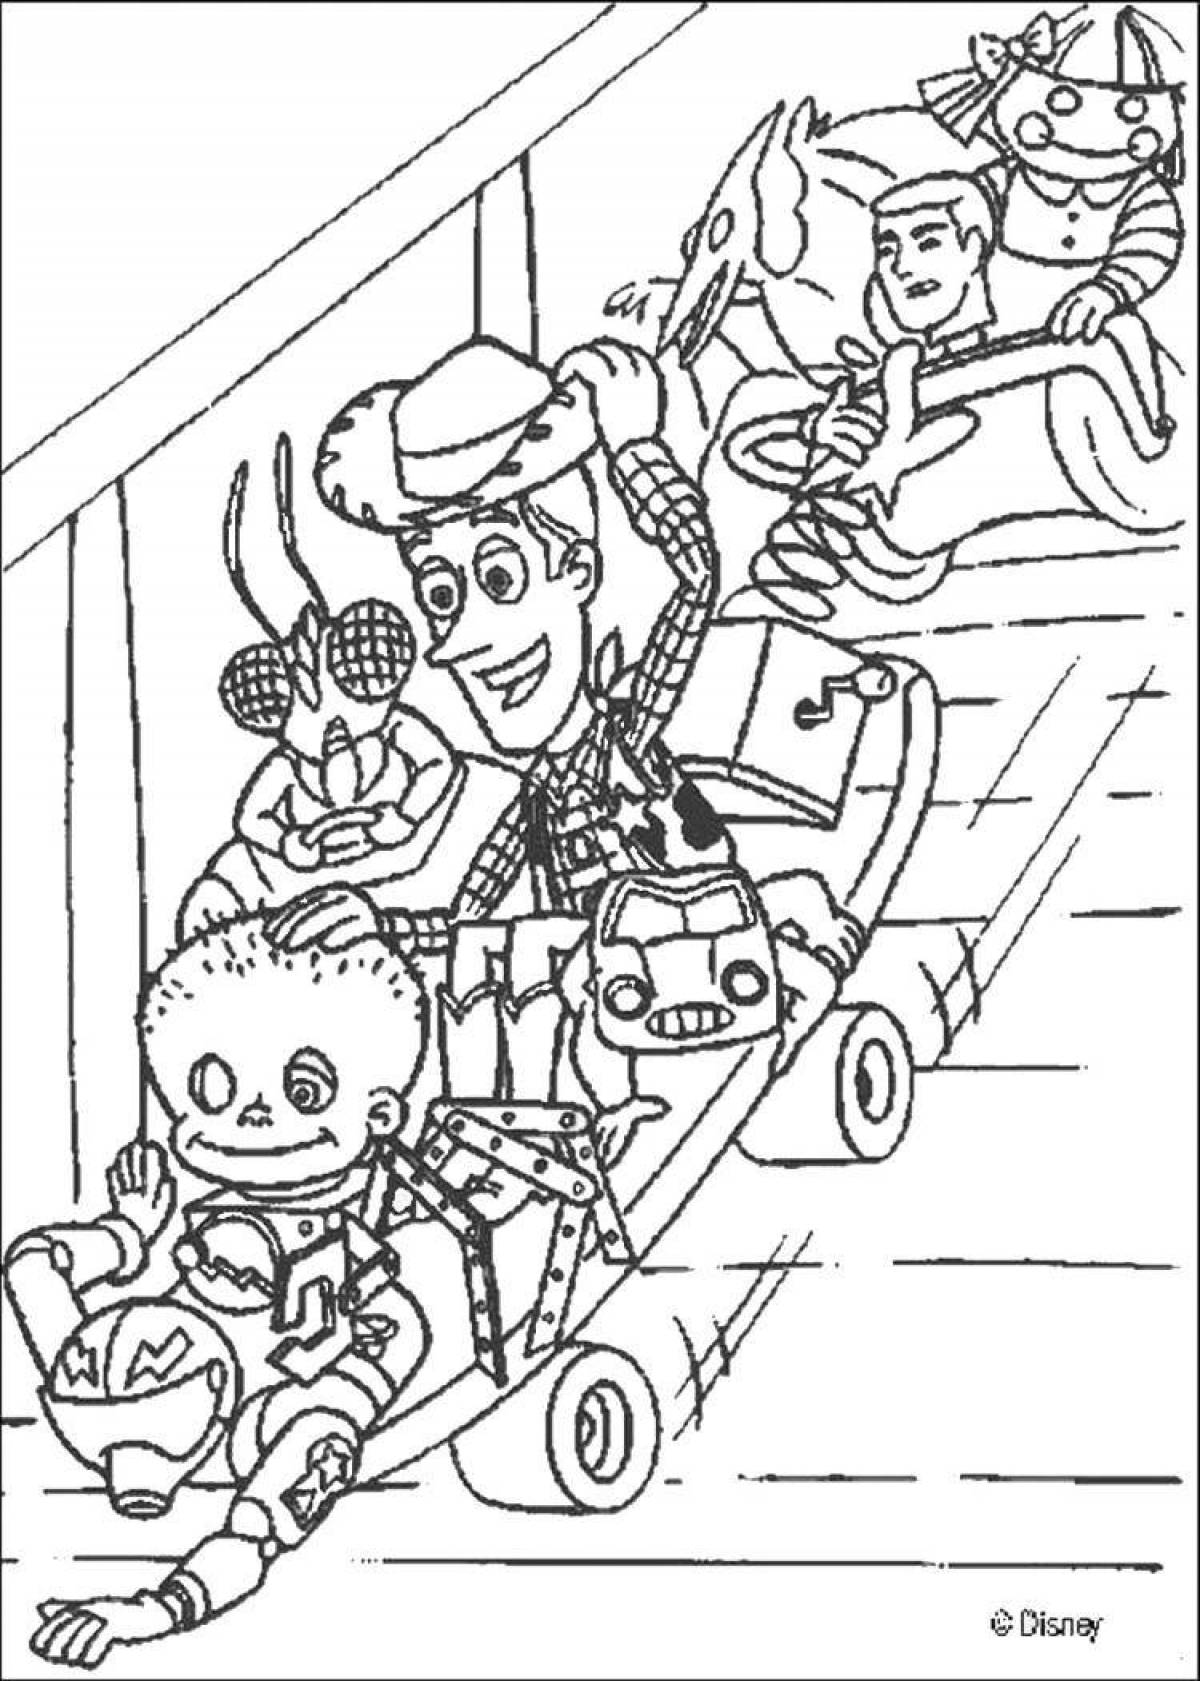 Killy willy's whimsical coloring book